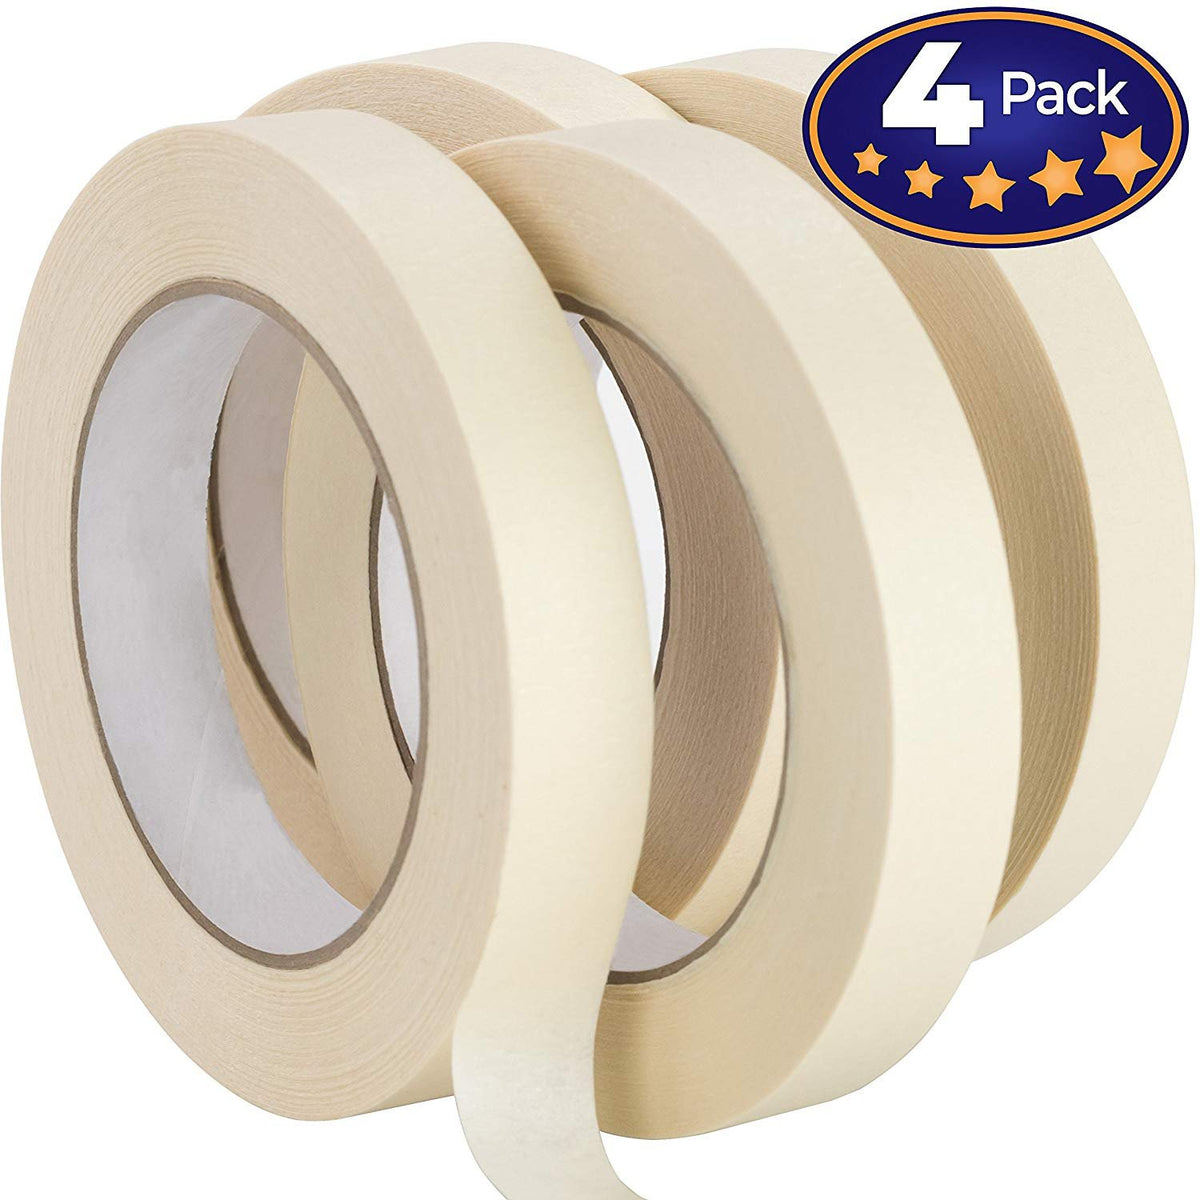 3M - 200 4 x 60yd 200 Utility Purpose Paper Tape - 4 in. x 180 ft. Crepe  Paper Masking Tape Roll. Bonding Tapes